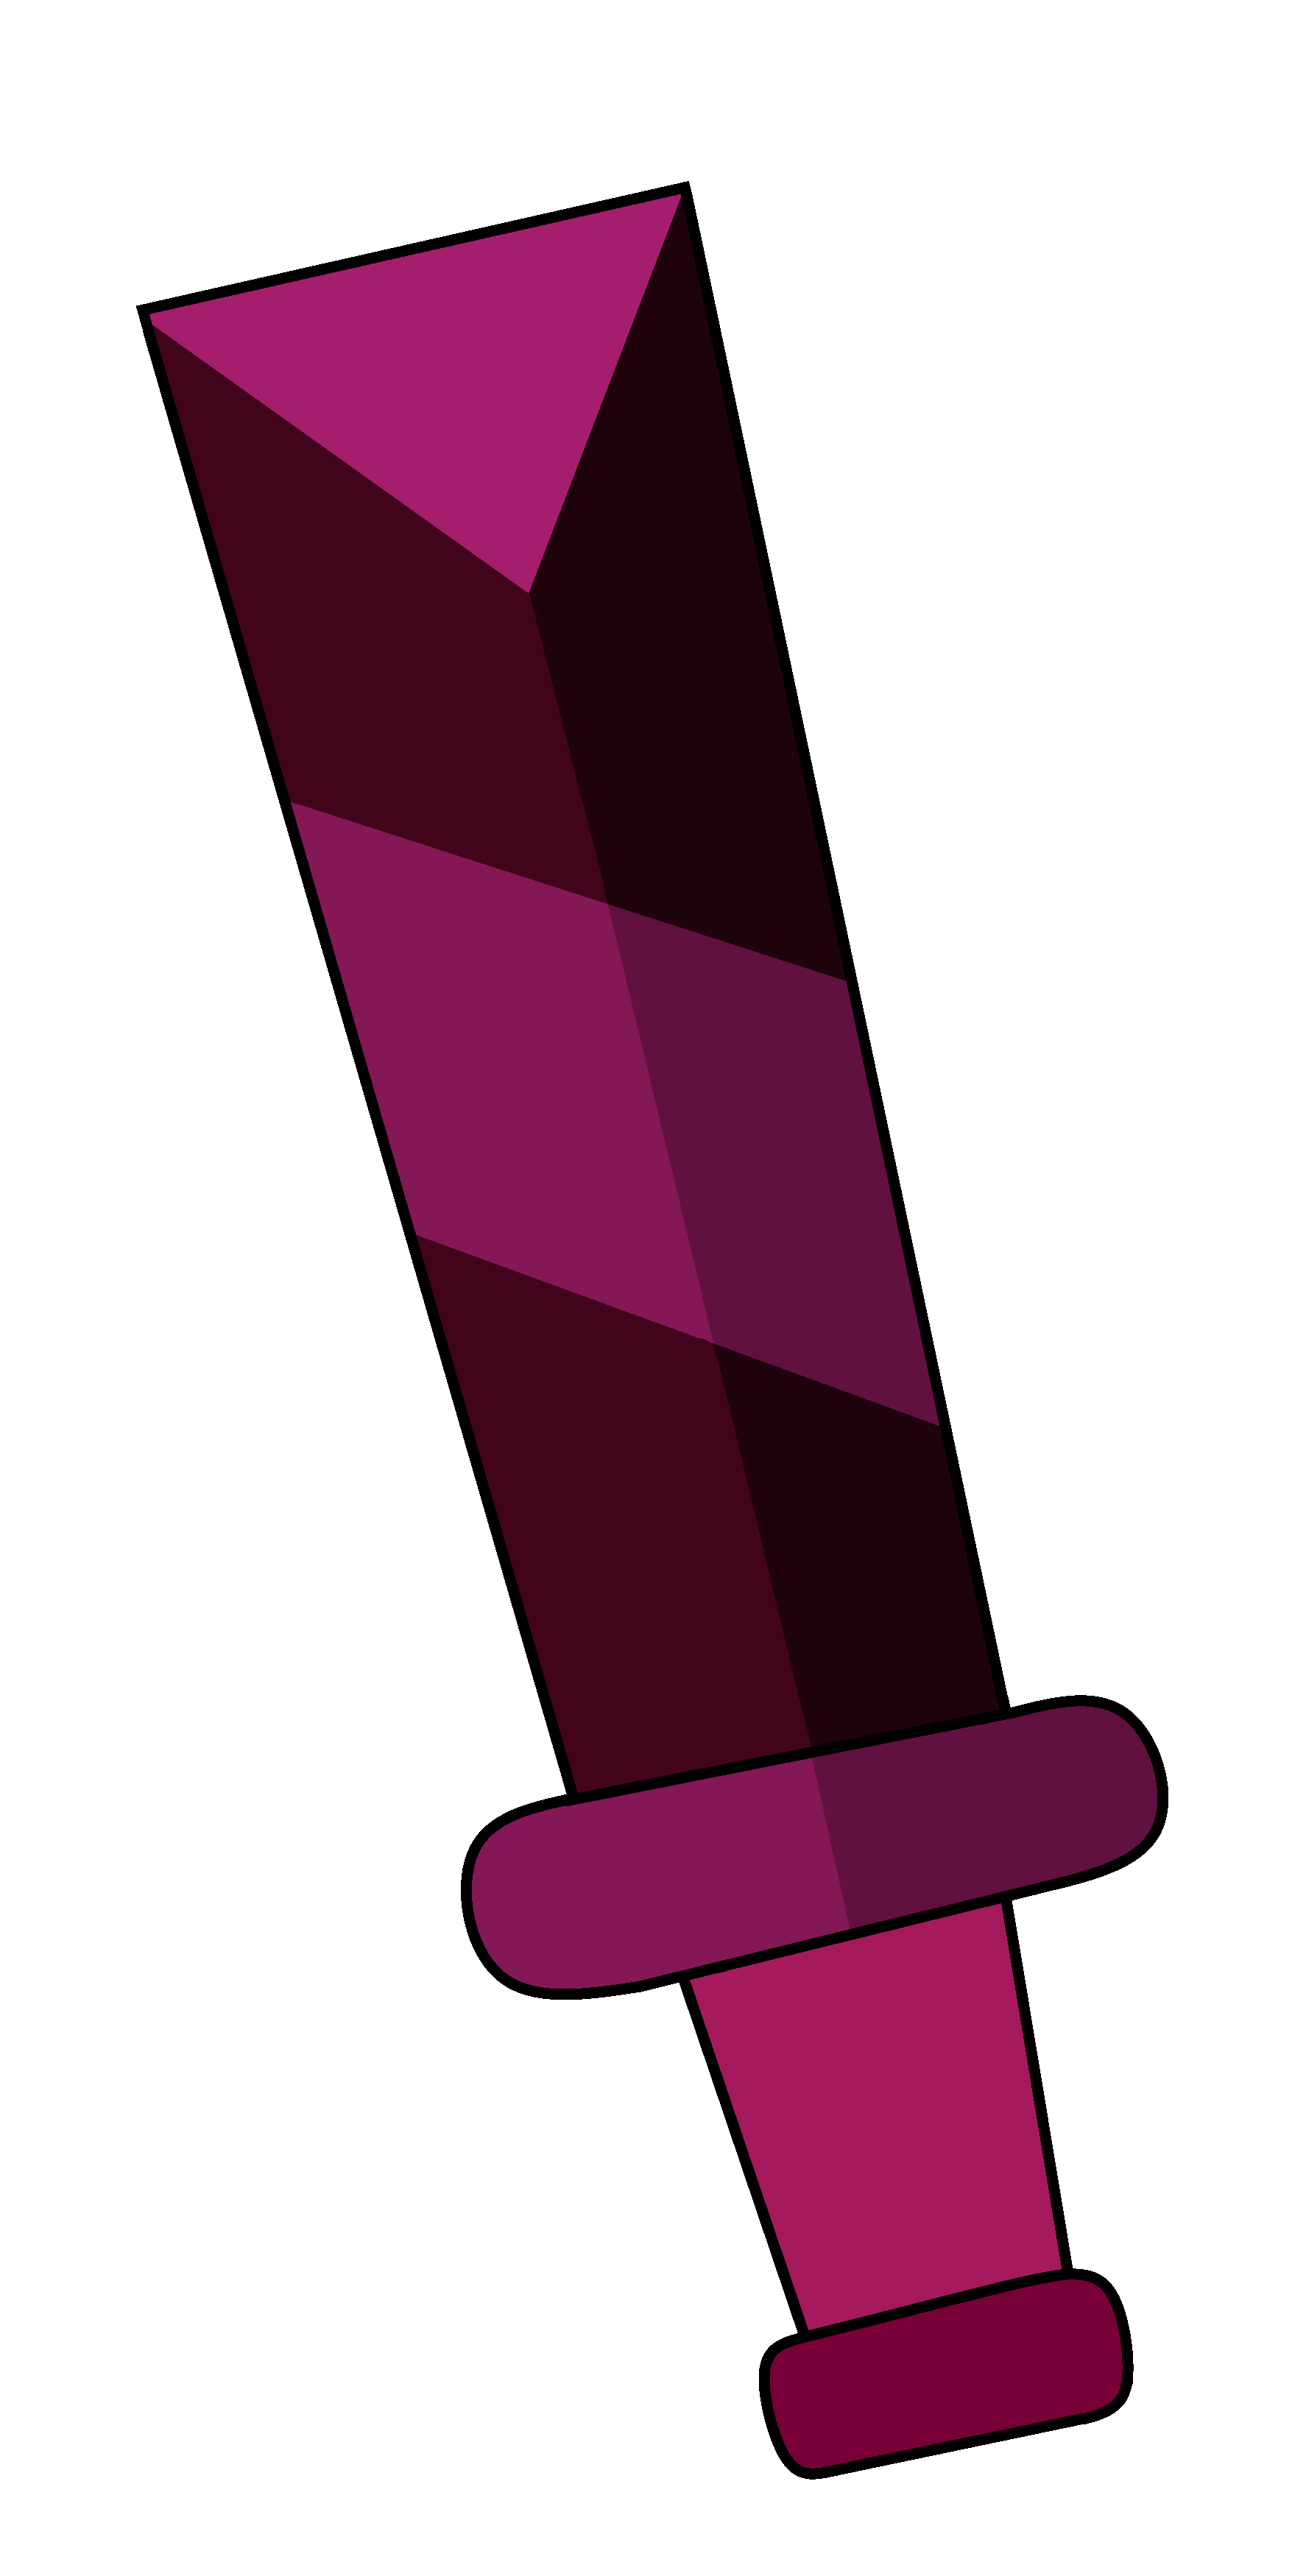 Mystery Clipart Knife Mystery Knife Transparent Free For Download On Webstockreview 2020 - baseball bat roblox wikia fandom powered by wikia